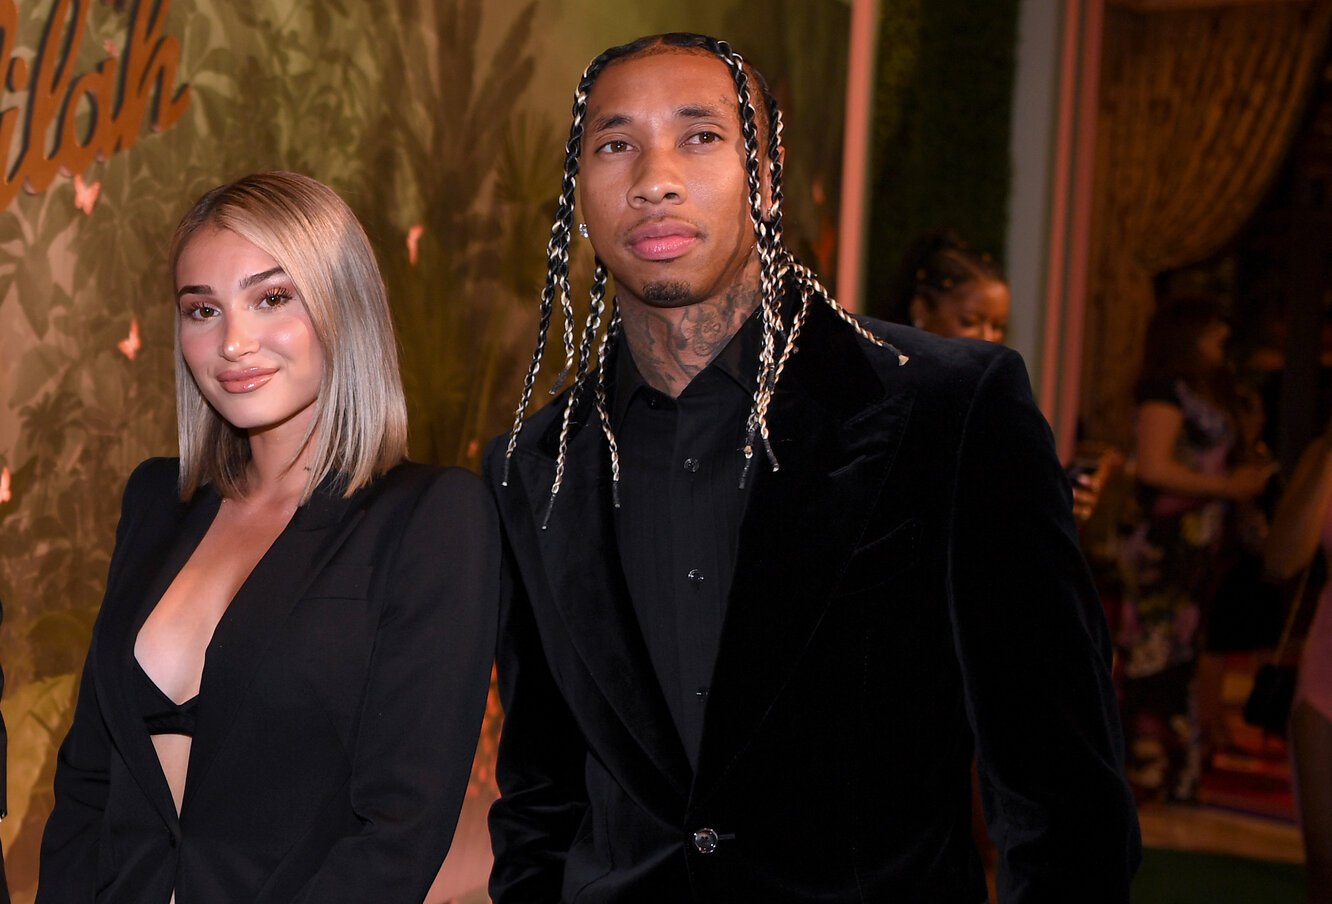 Camaryn Swanson smiling and wearing a black jacket stands next to Tyga, wearing a black jacket and black shirt.